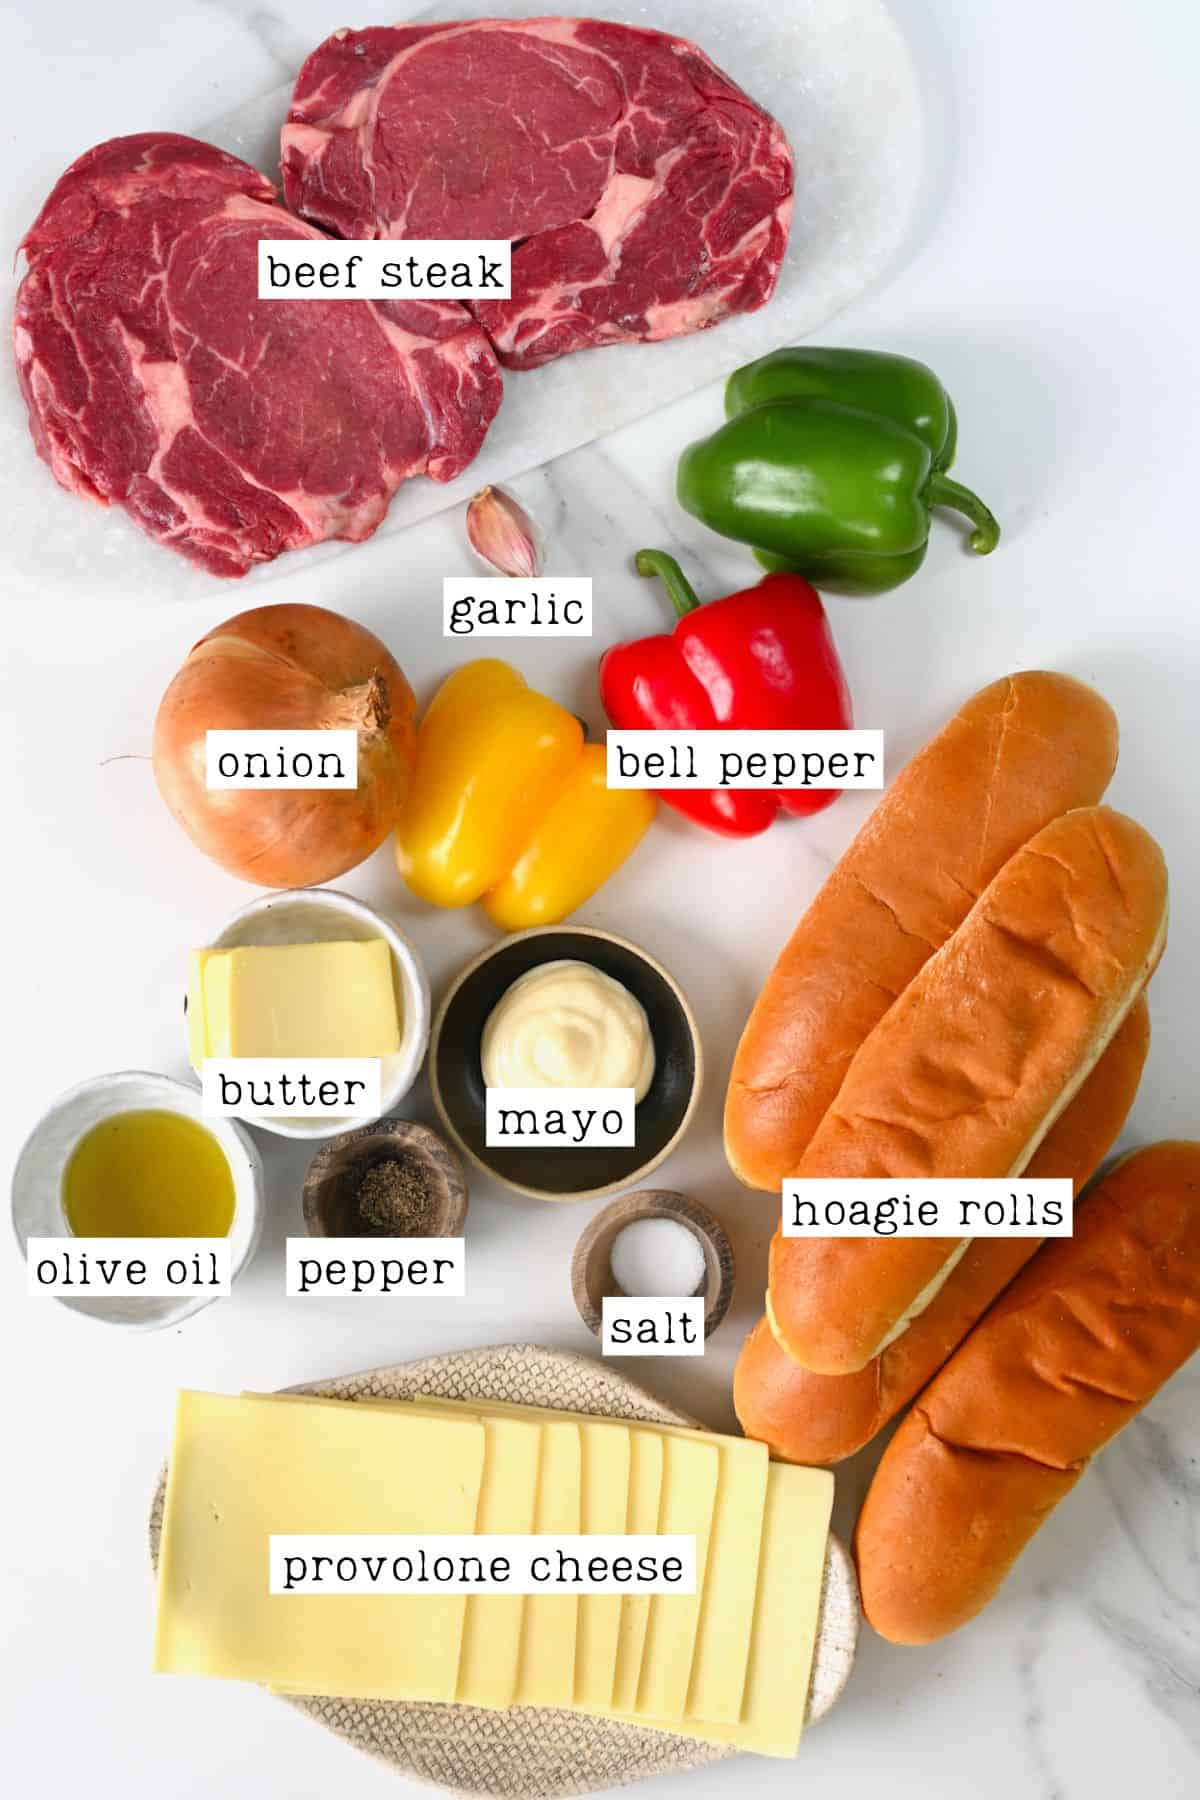 Ingredients for Philly cheesesteak sandwich